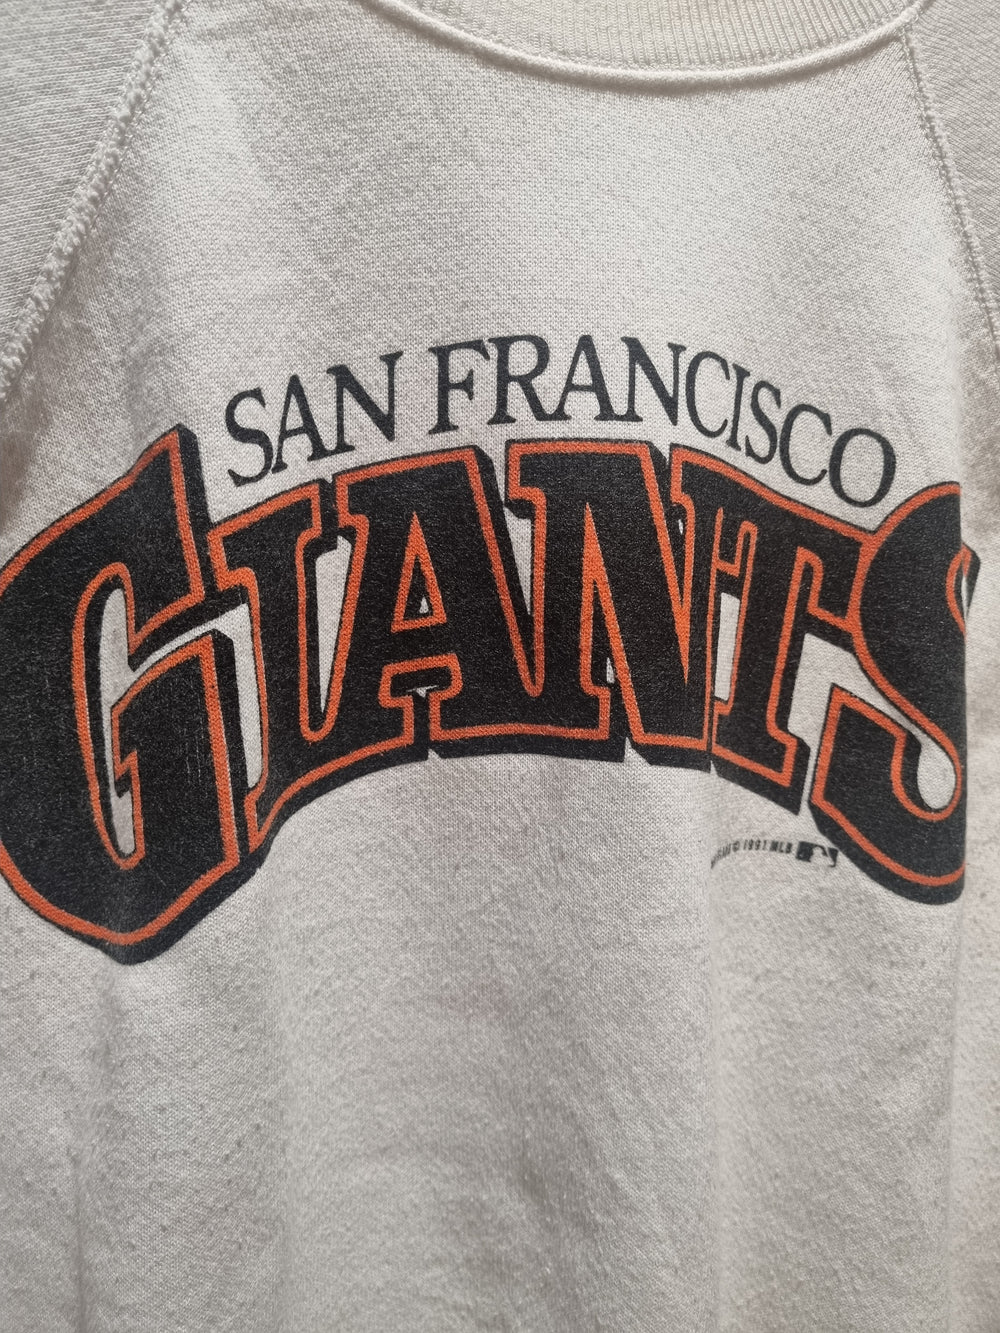 San Francisco Giants MLB 1991 Youth Large / Adult Small